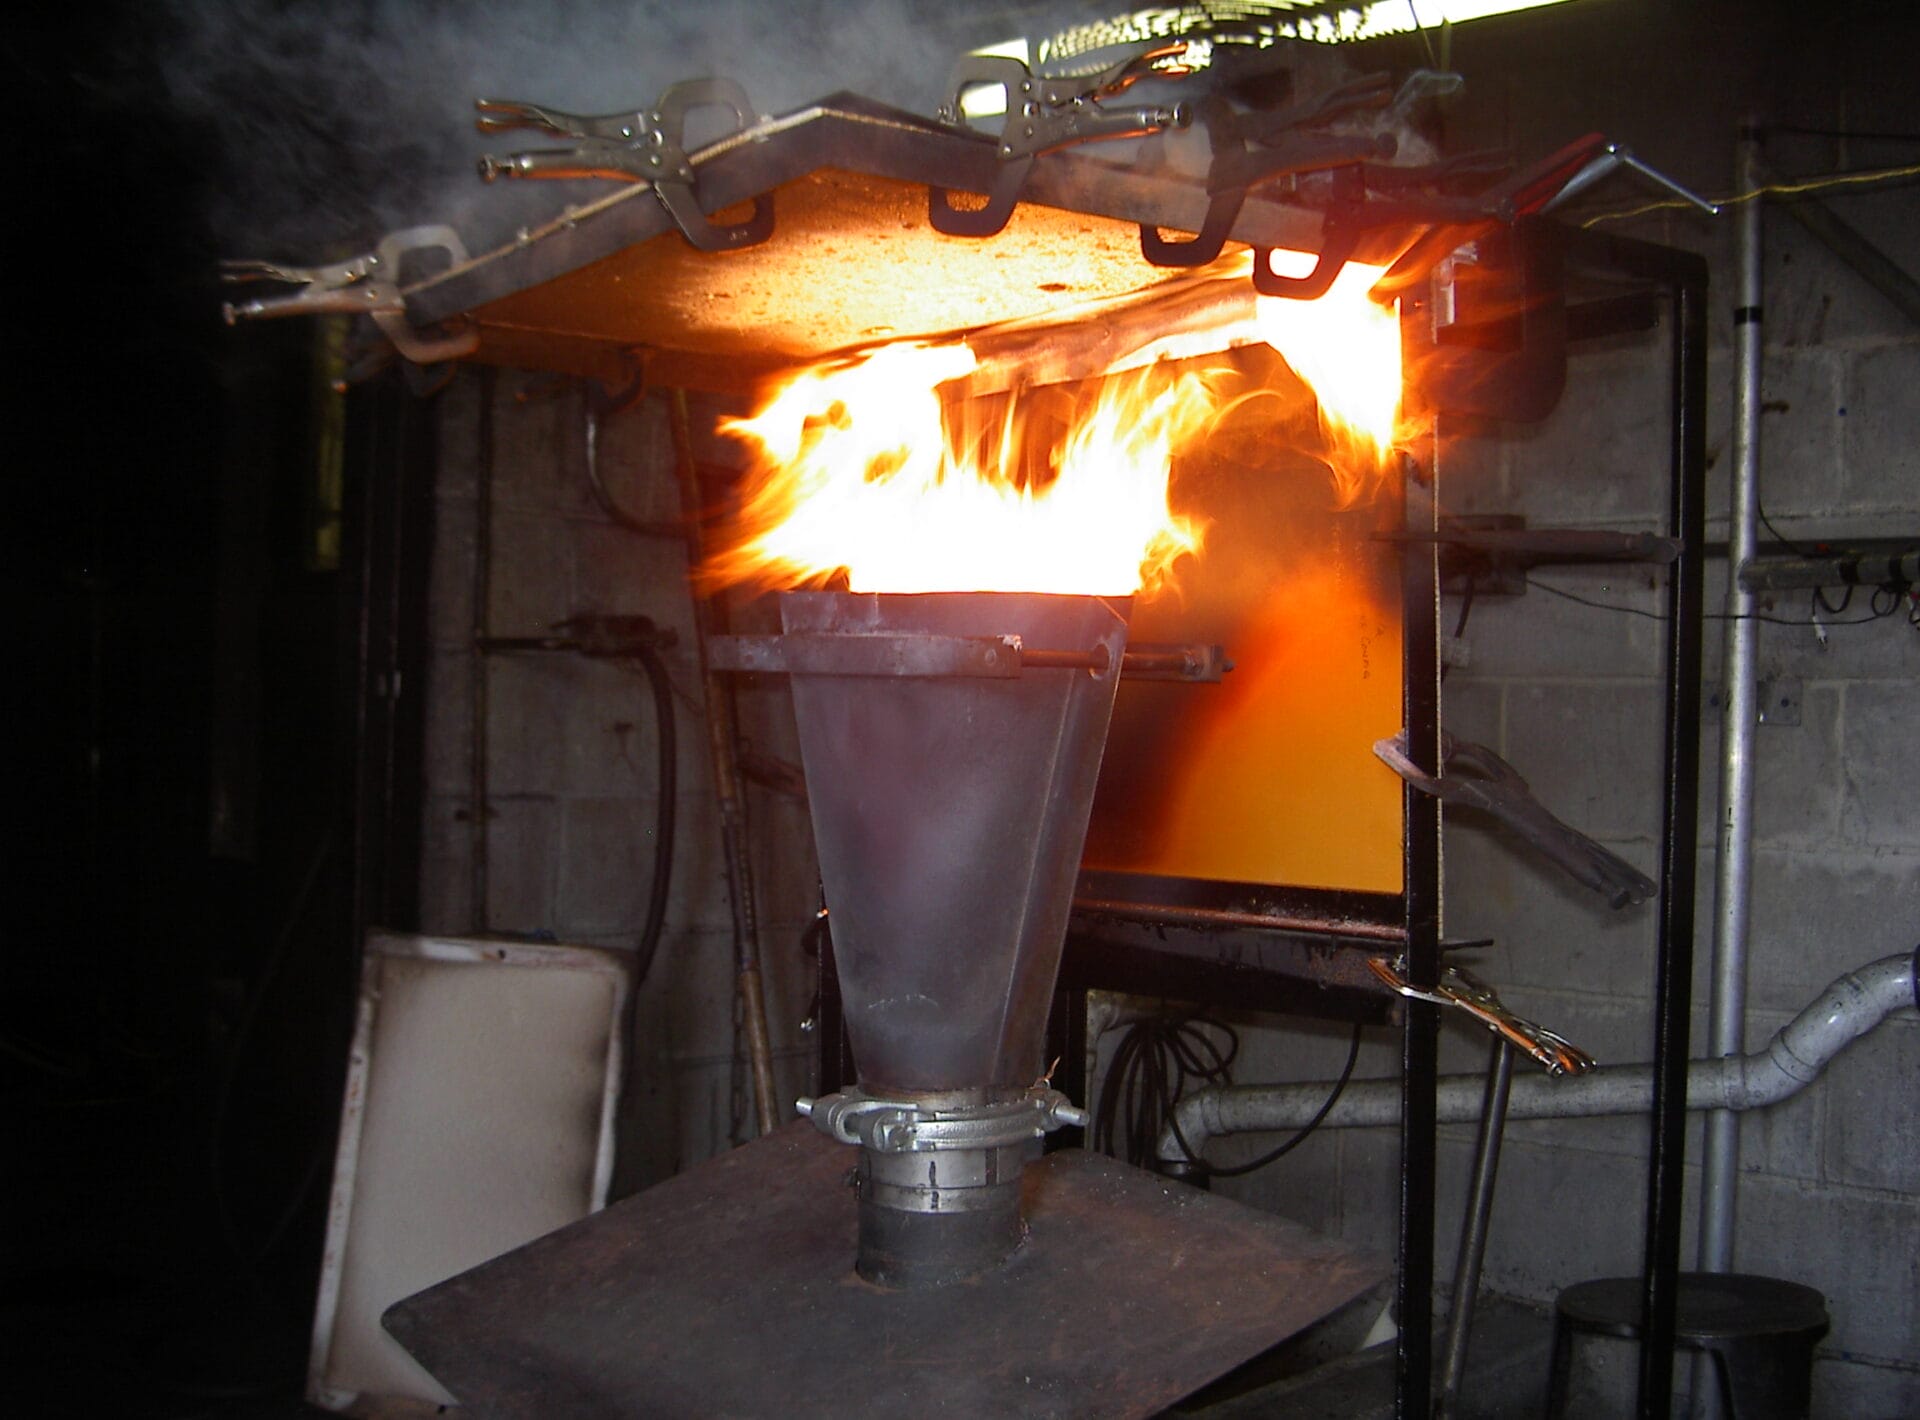 Aircraft component being blasted with fire in flammability testing lab